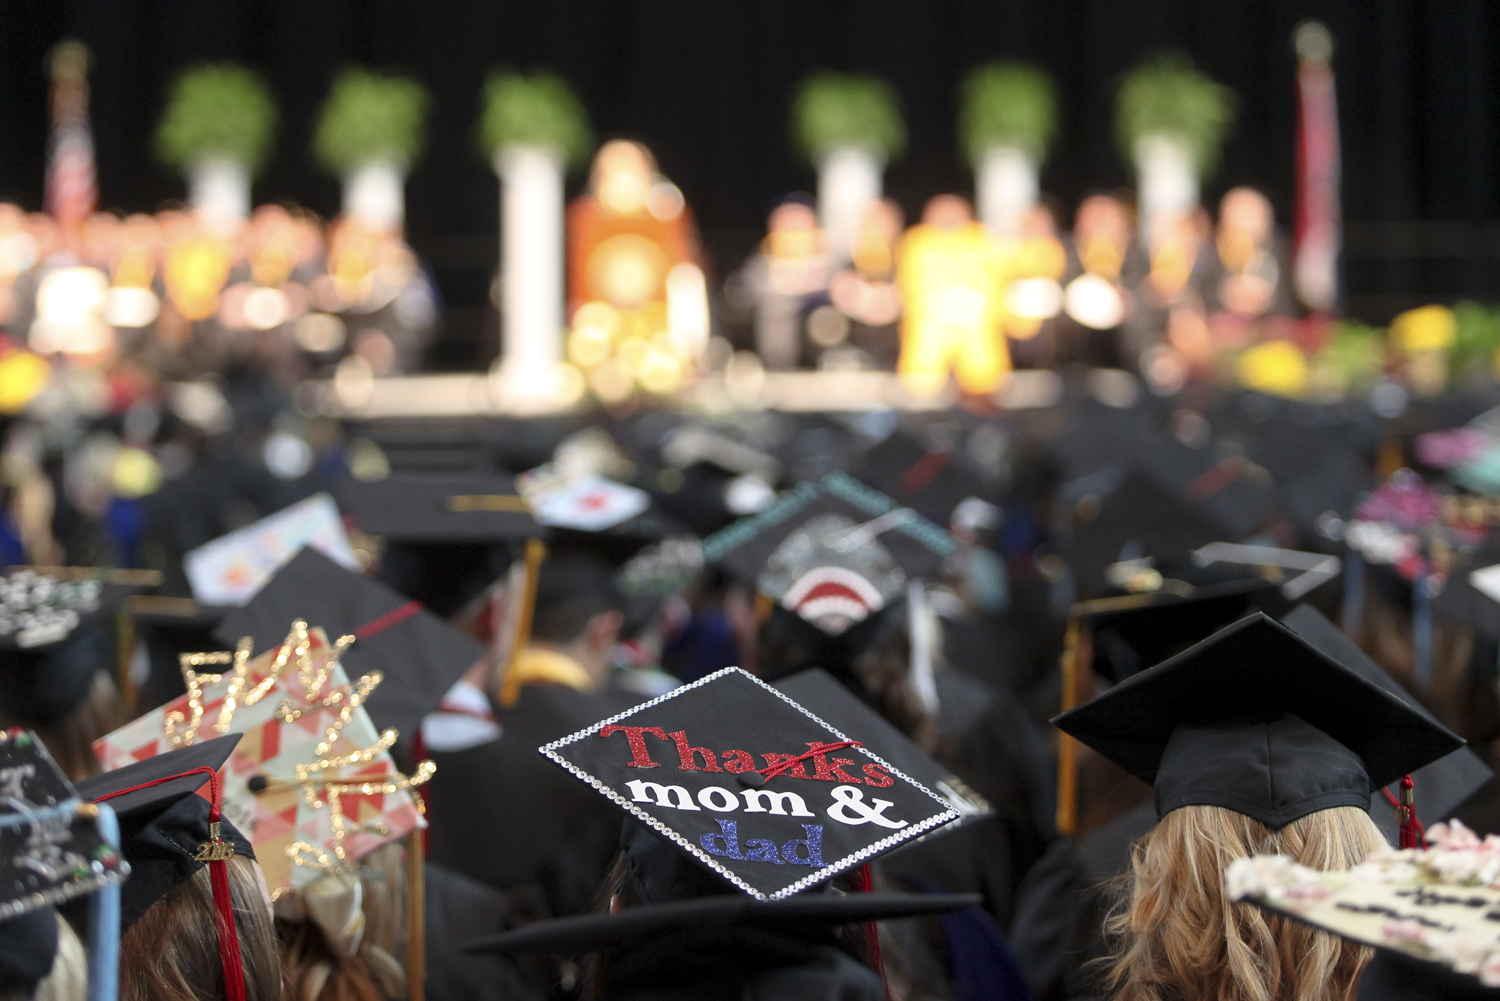 A message to parents decorates the top of a mortar board during a prior Honors Convocation. Photo by Rob Hill.